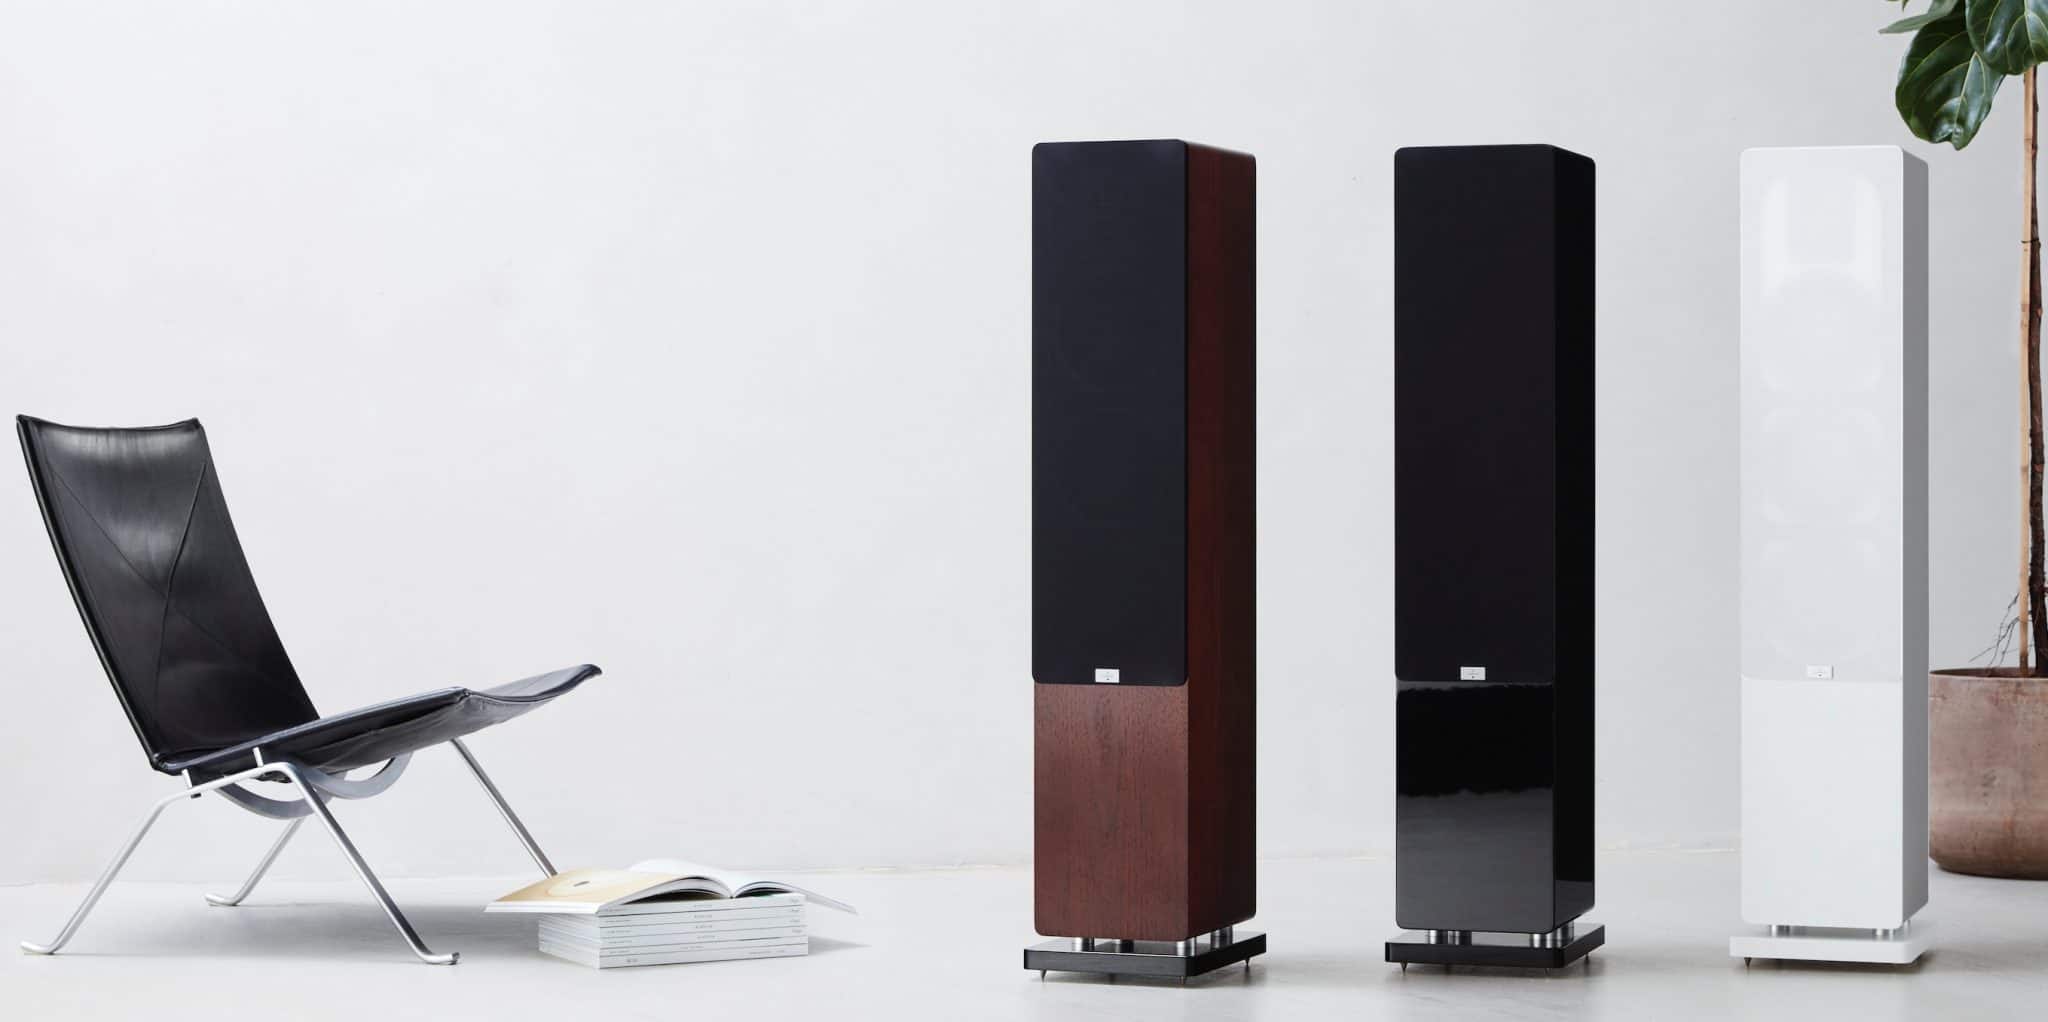 Audiovector Speakers: Trade-in Deal Cuts Prices 